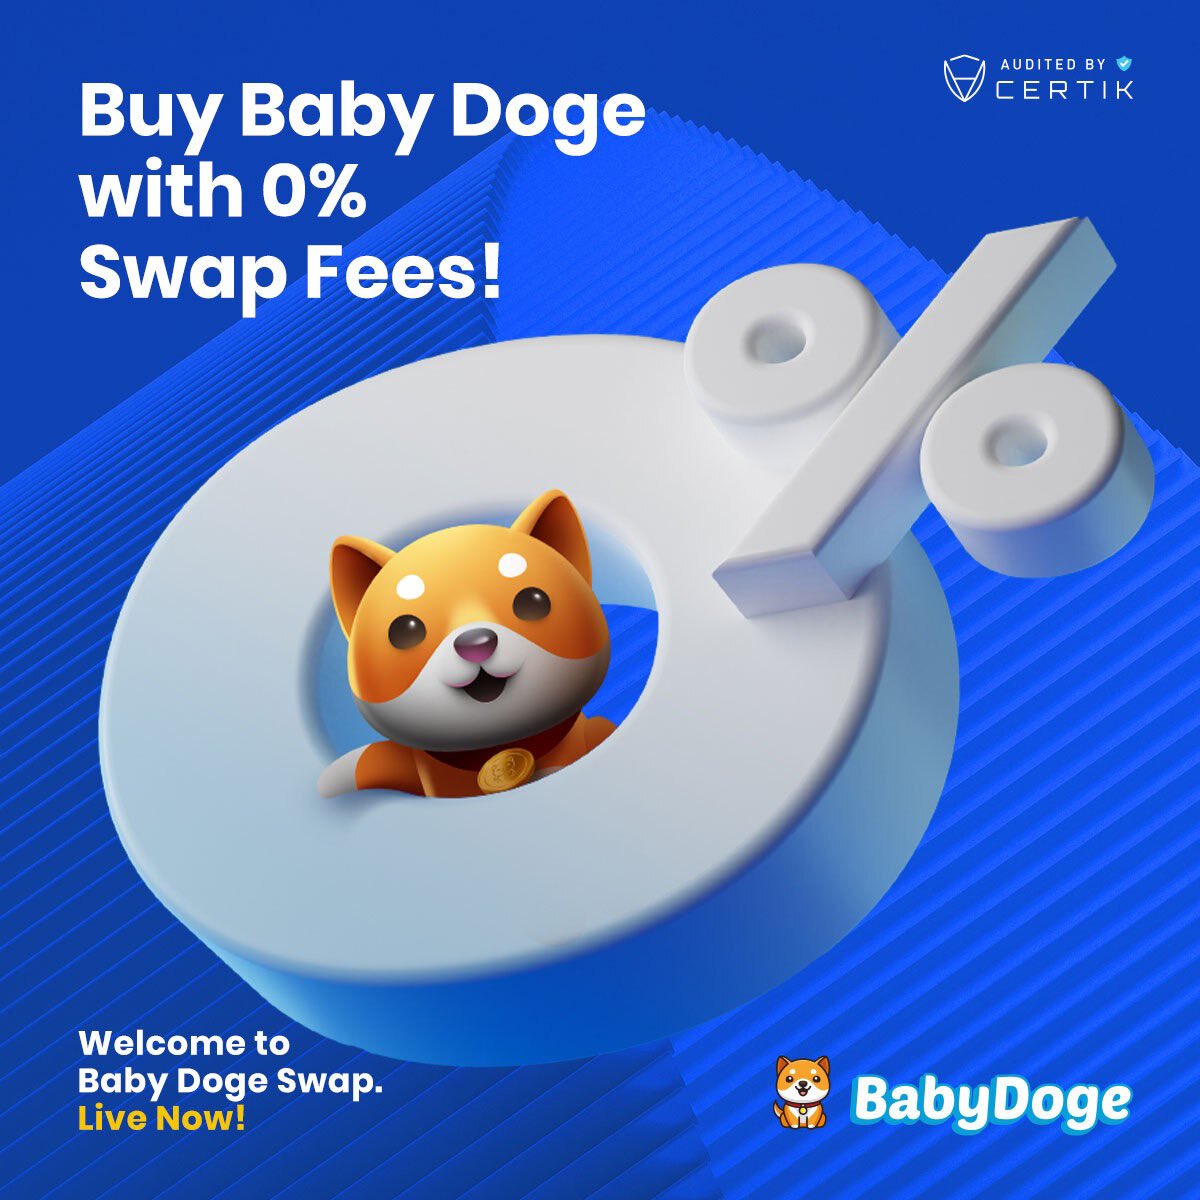 $250 giveaway in 24 hours! To enter: 1. RT this tweet 2. Post a picture using BabyDogeSwap.com 3. Join t.me/babydogearmy 4. Follow @BabyDogeCoin